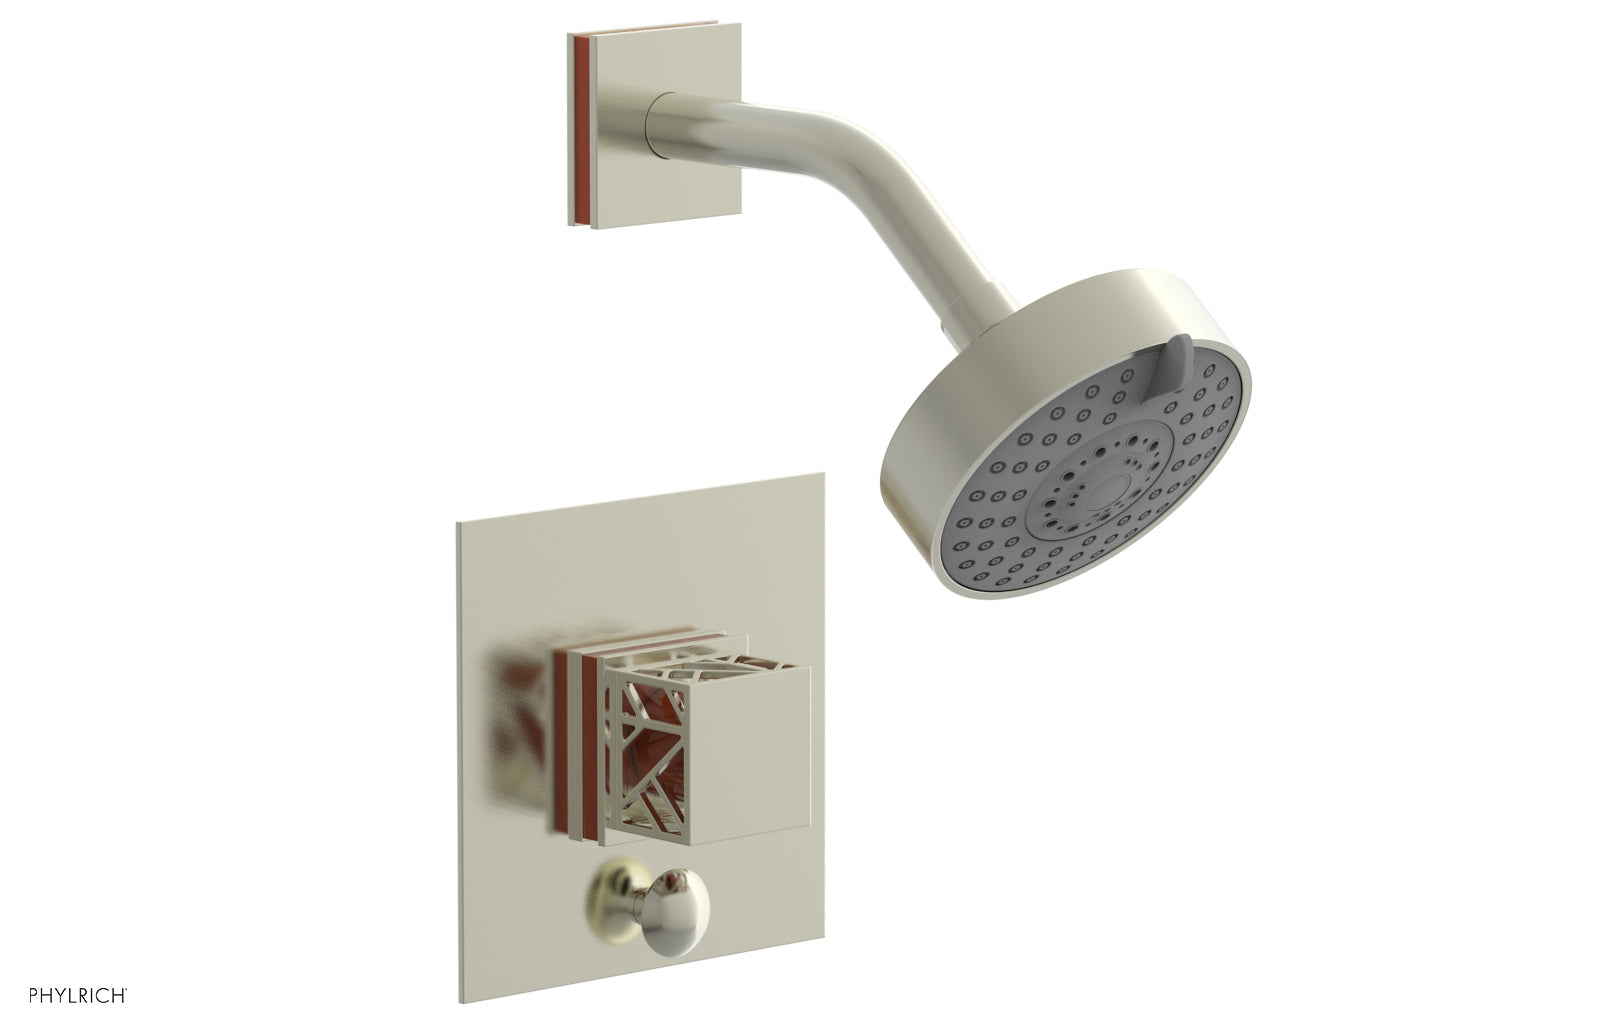 Phylrich JOLIE Pressure Balance Shower and Diverter Set (Less Spout), Square Handle with "Orange" Accents